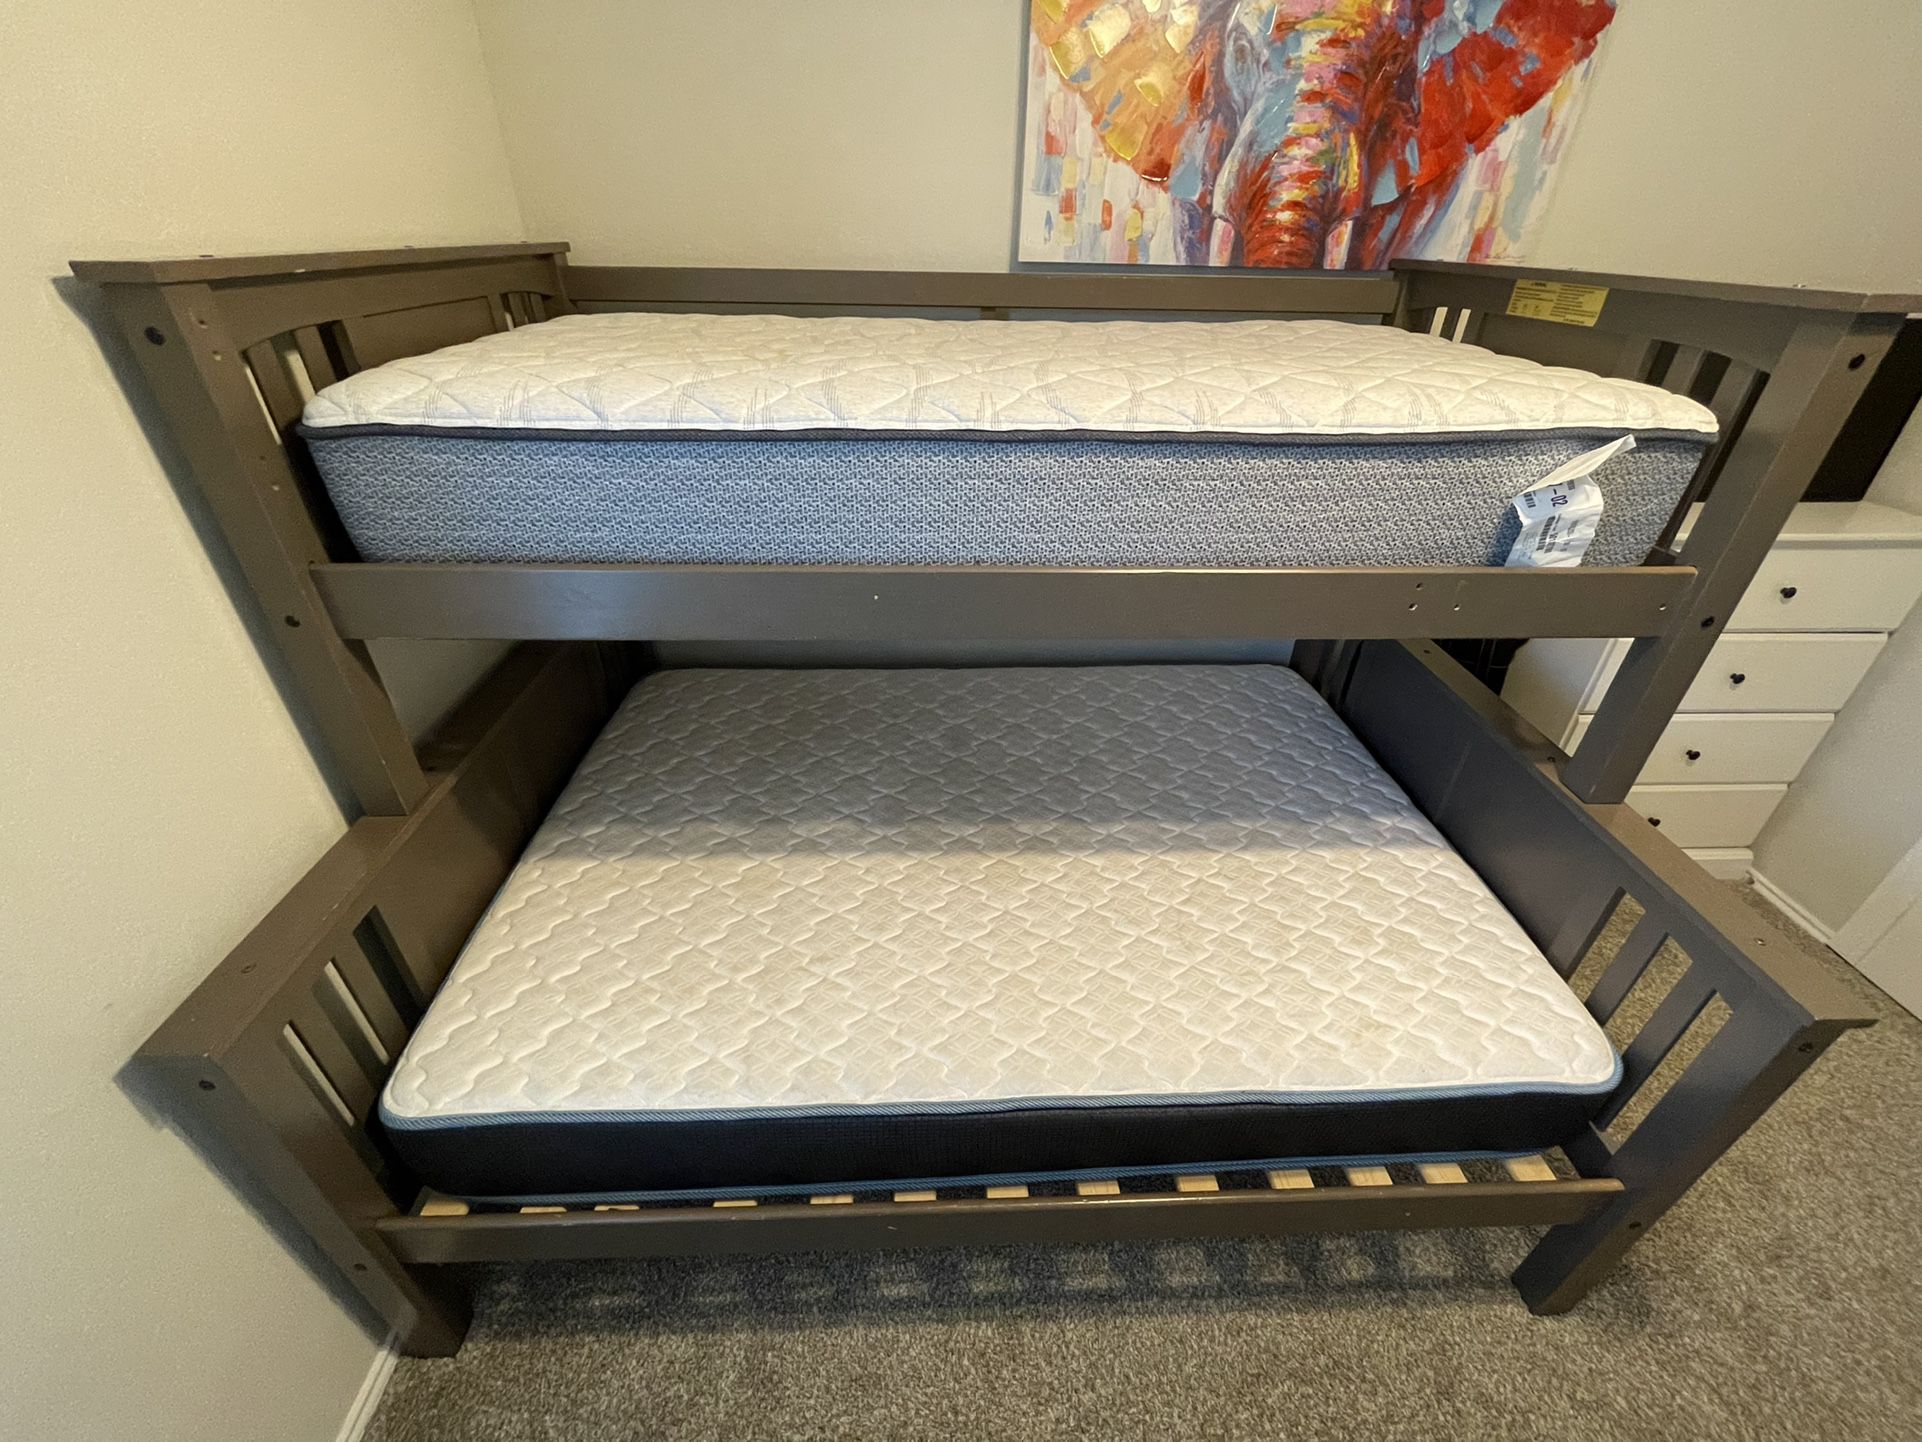 Bunk bed, twin upper bunk and full lower bunk.